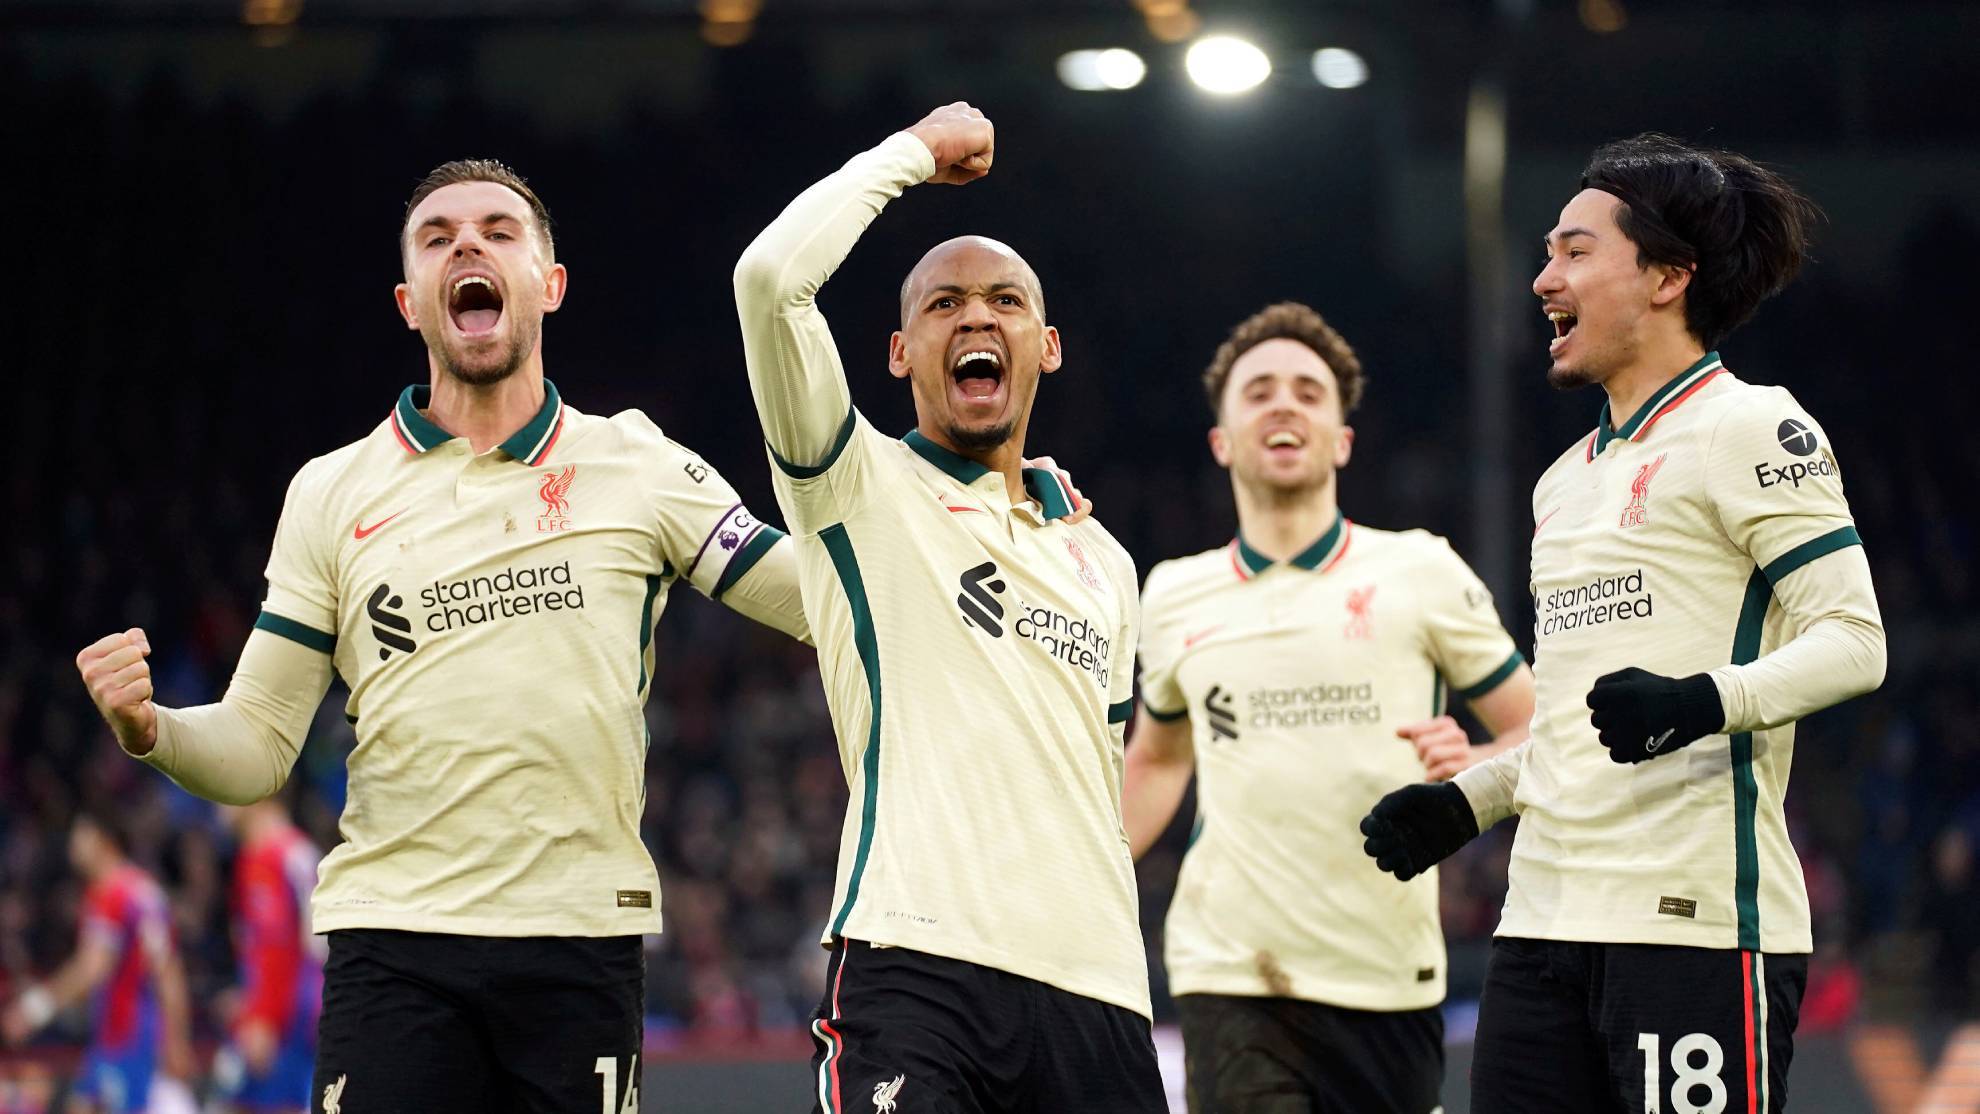 Liverpool's Fabinho celebrates scoring his side's third goal of the game Crystal Palace vs Liverpool.